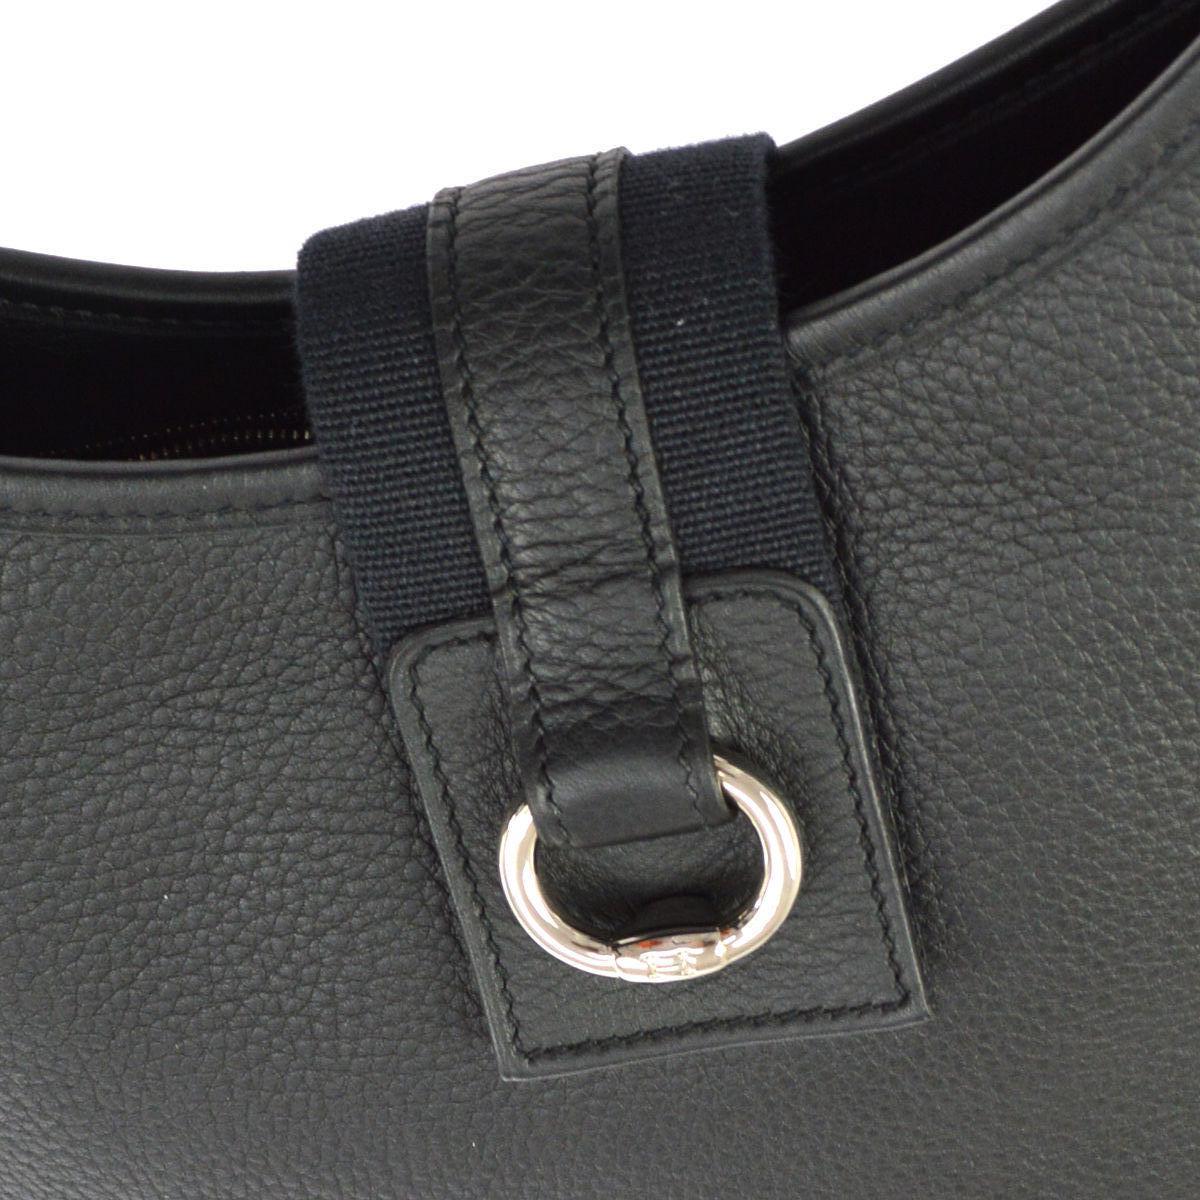 Hermes Black Leather Silver Large Carryall Shoulder Crossbody Bag

Leather
Canvas
Silver tone hardware
Leather lining
Made in France
Date code present
Adjustable shoulder strap (two settings) ~13.5